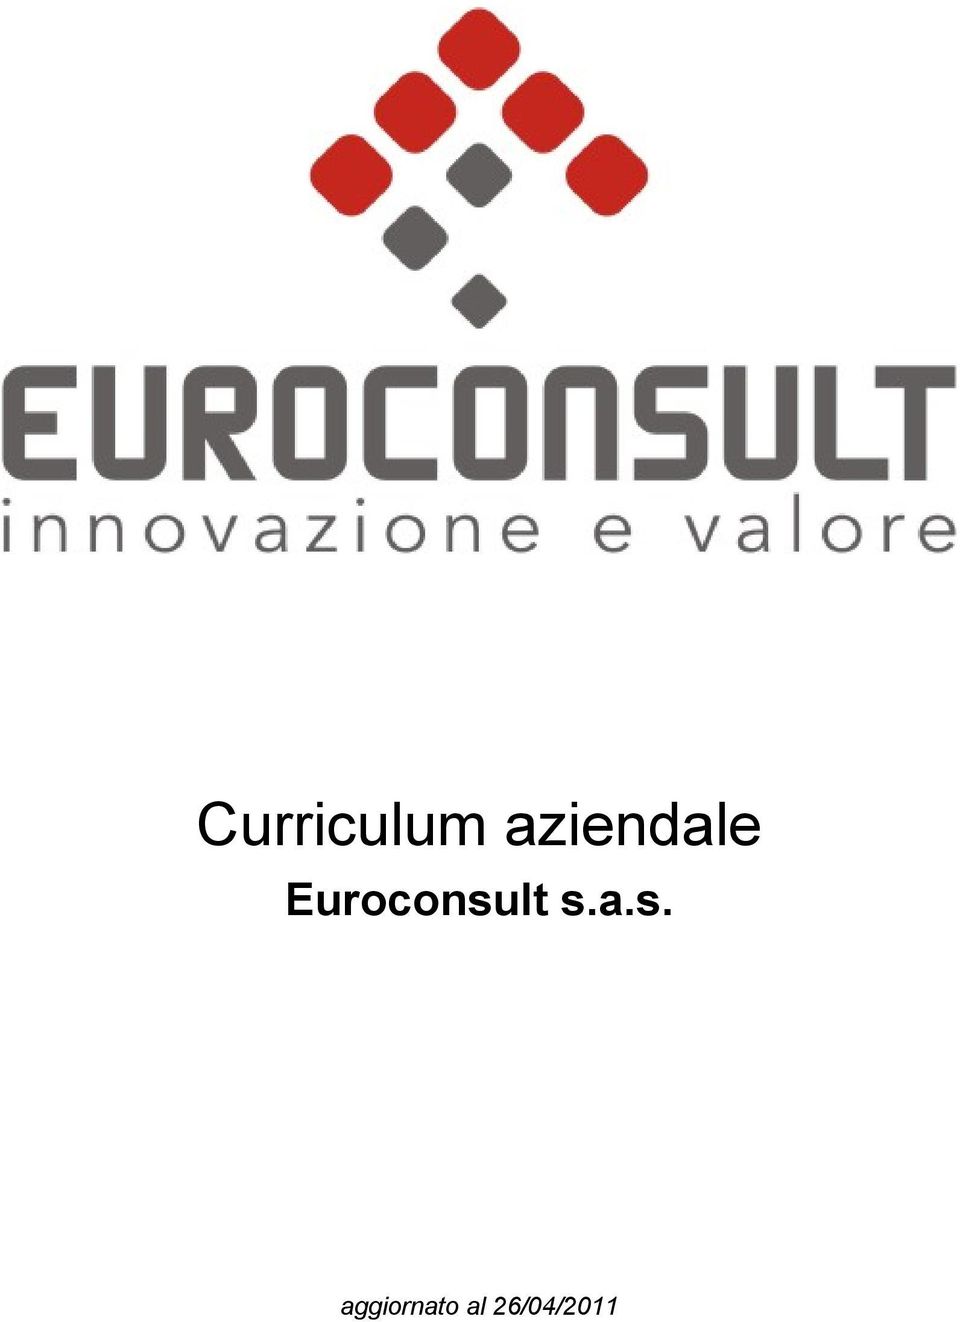 Euroconsult s.a.